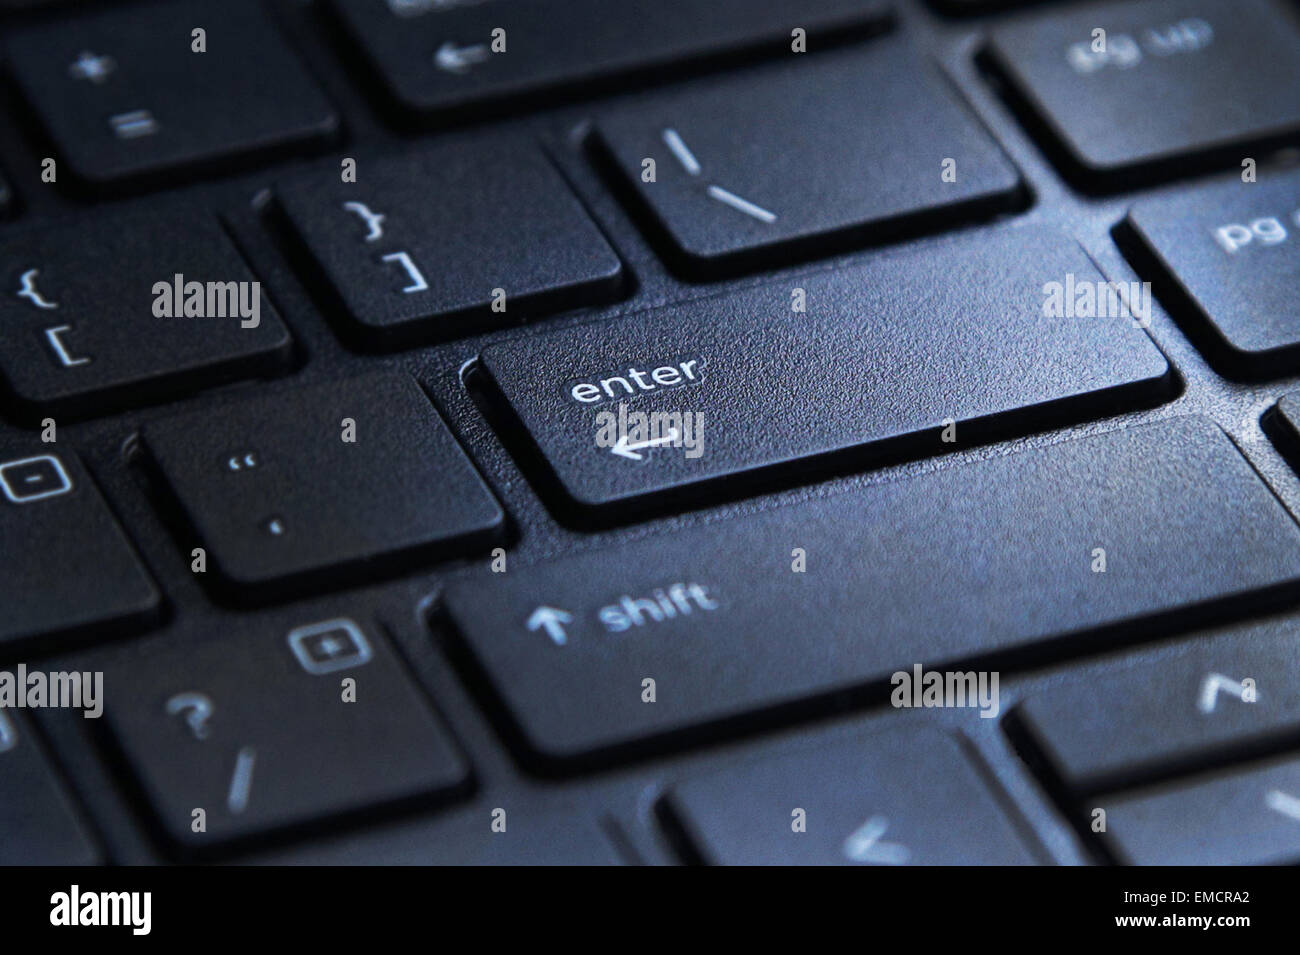 laptop computer keyboard with highlighted enter key button Stock Photo